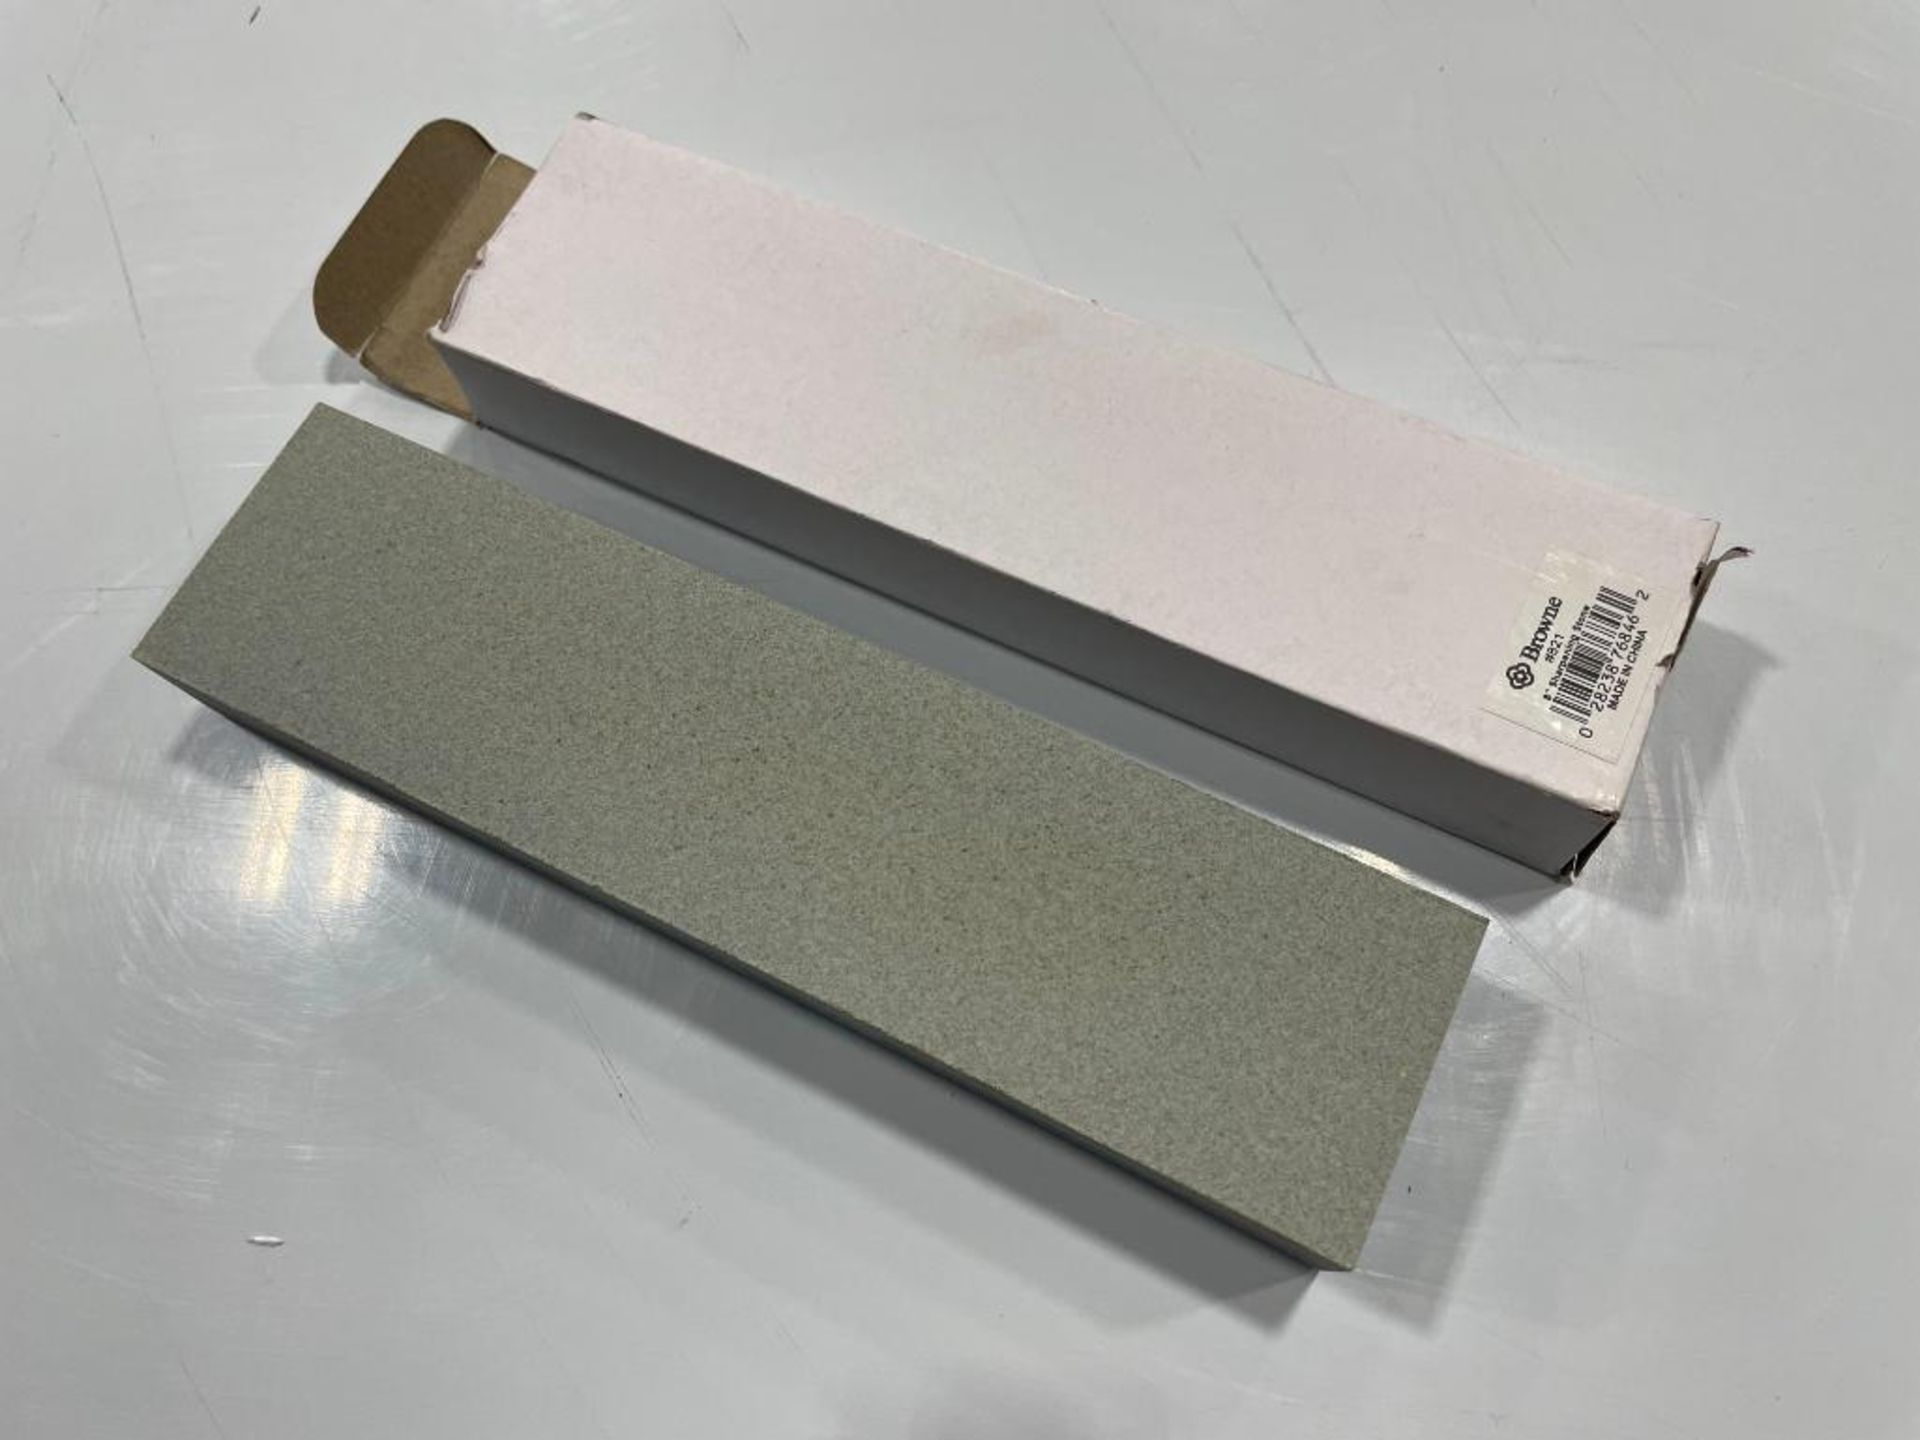 BROWNE 821 SILICON CARBIDE 8" SHARPENING STONE - Image 5 of 5